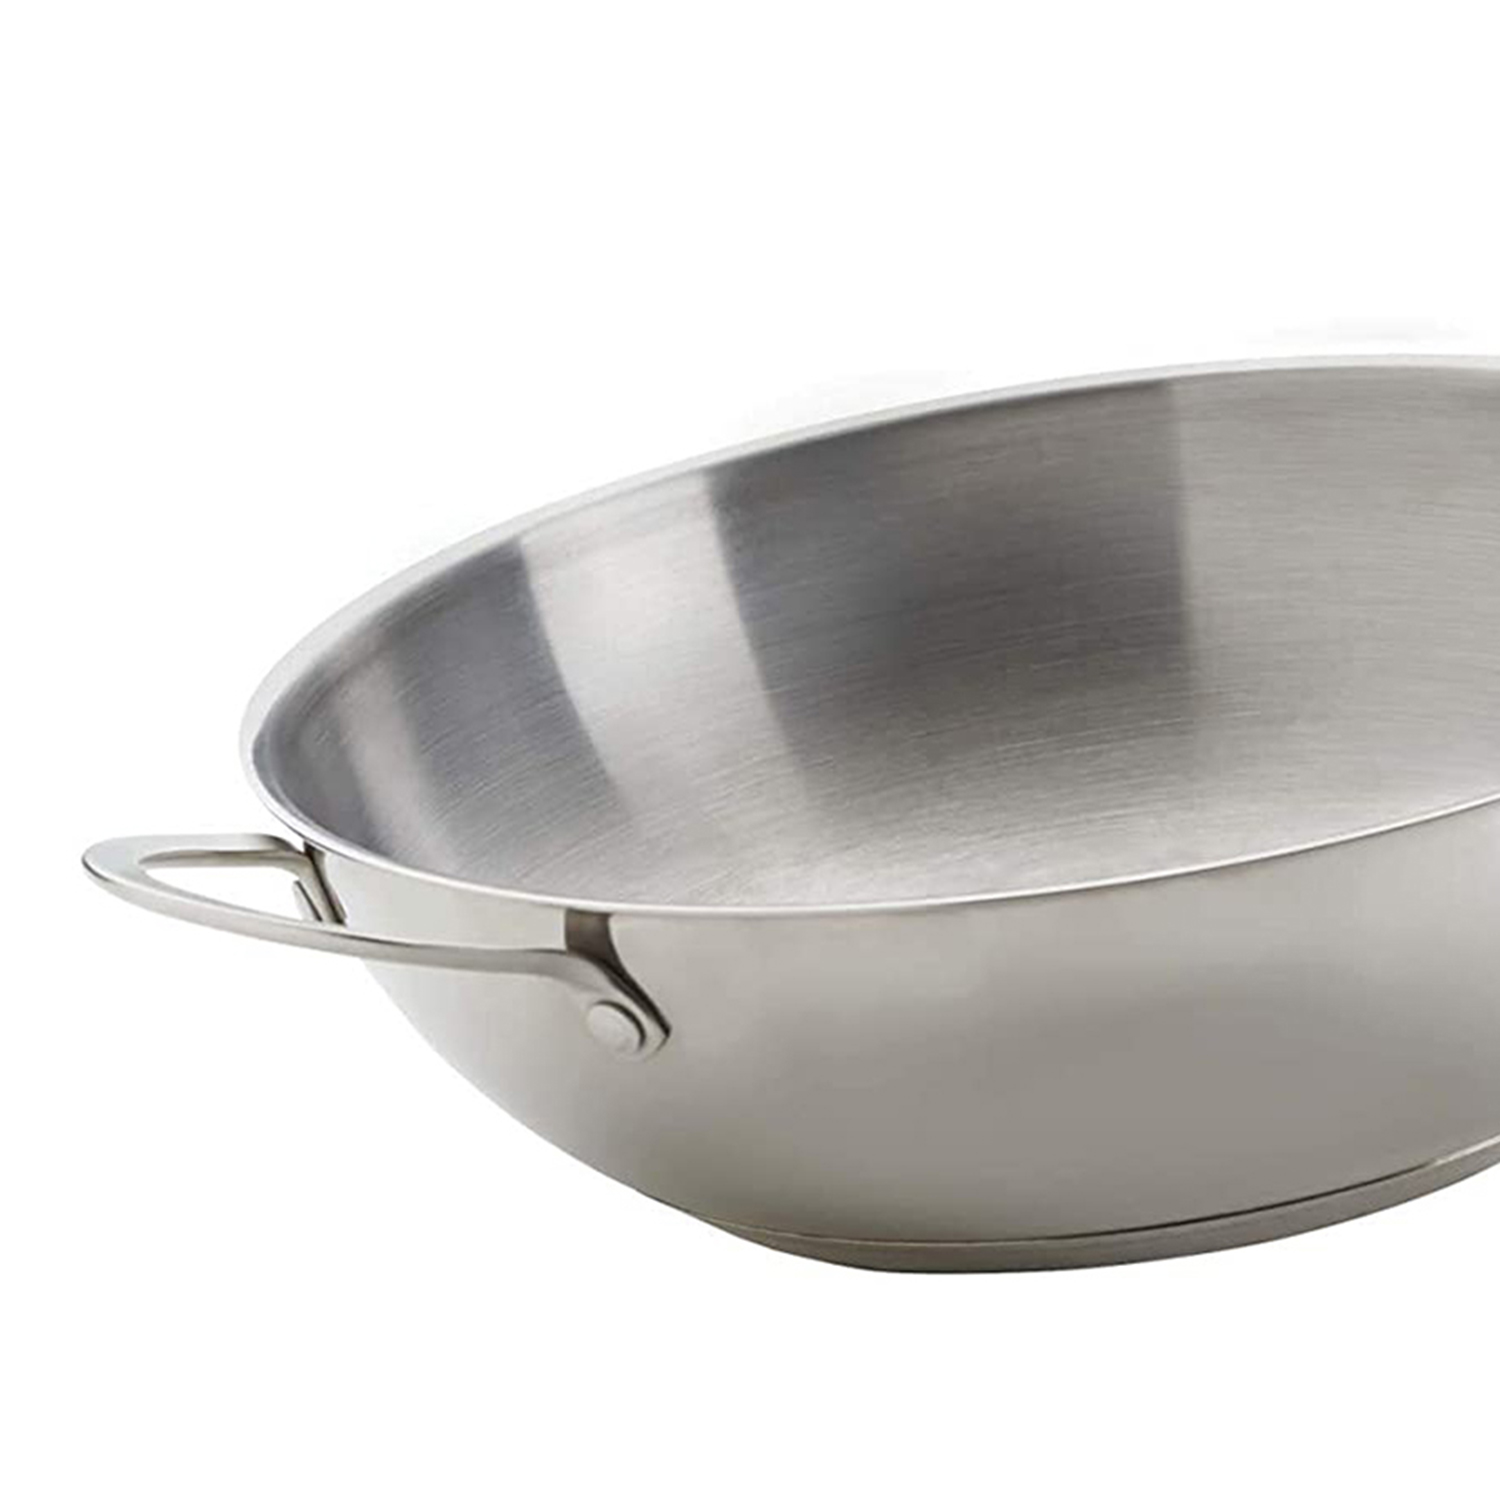 Stainless Steel Wok - image 4 of 5